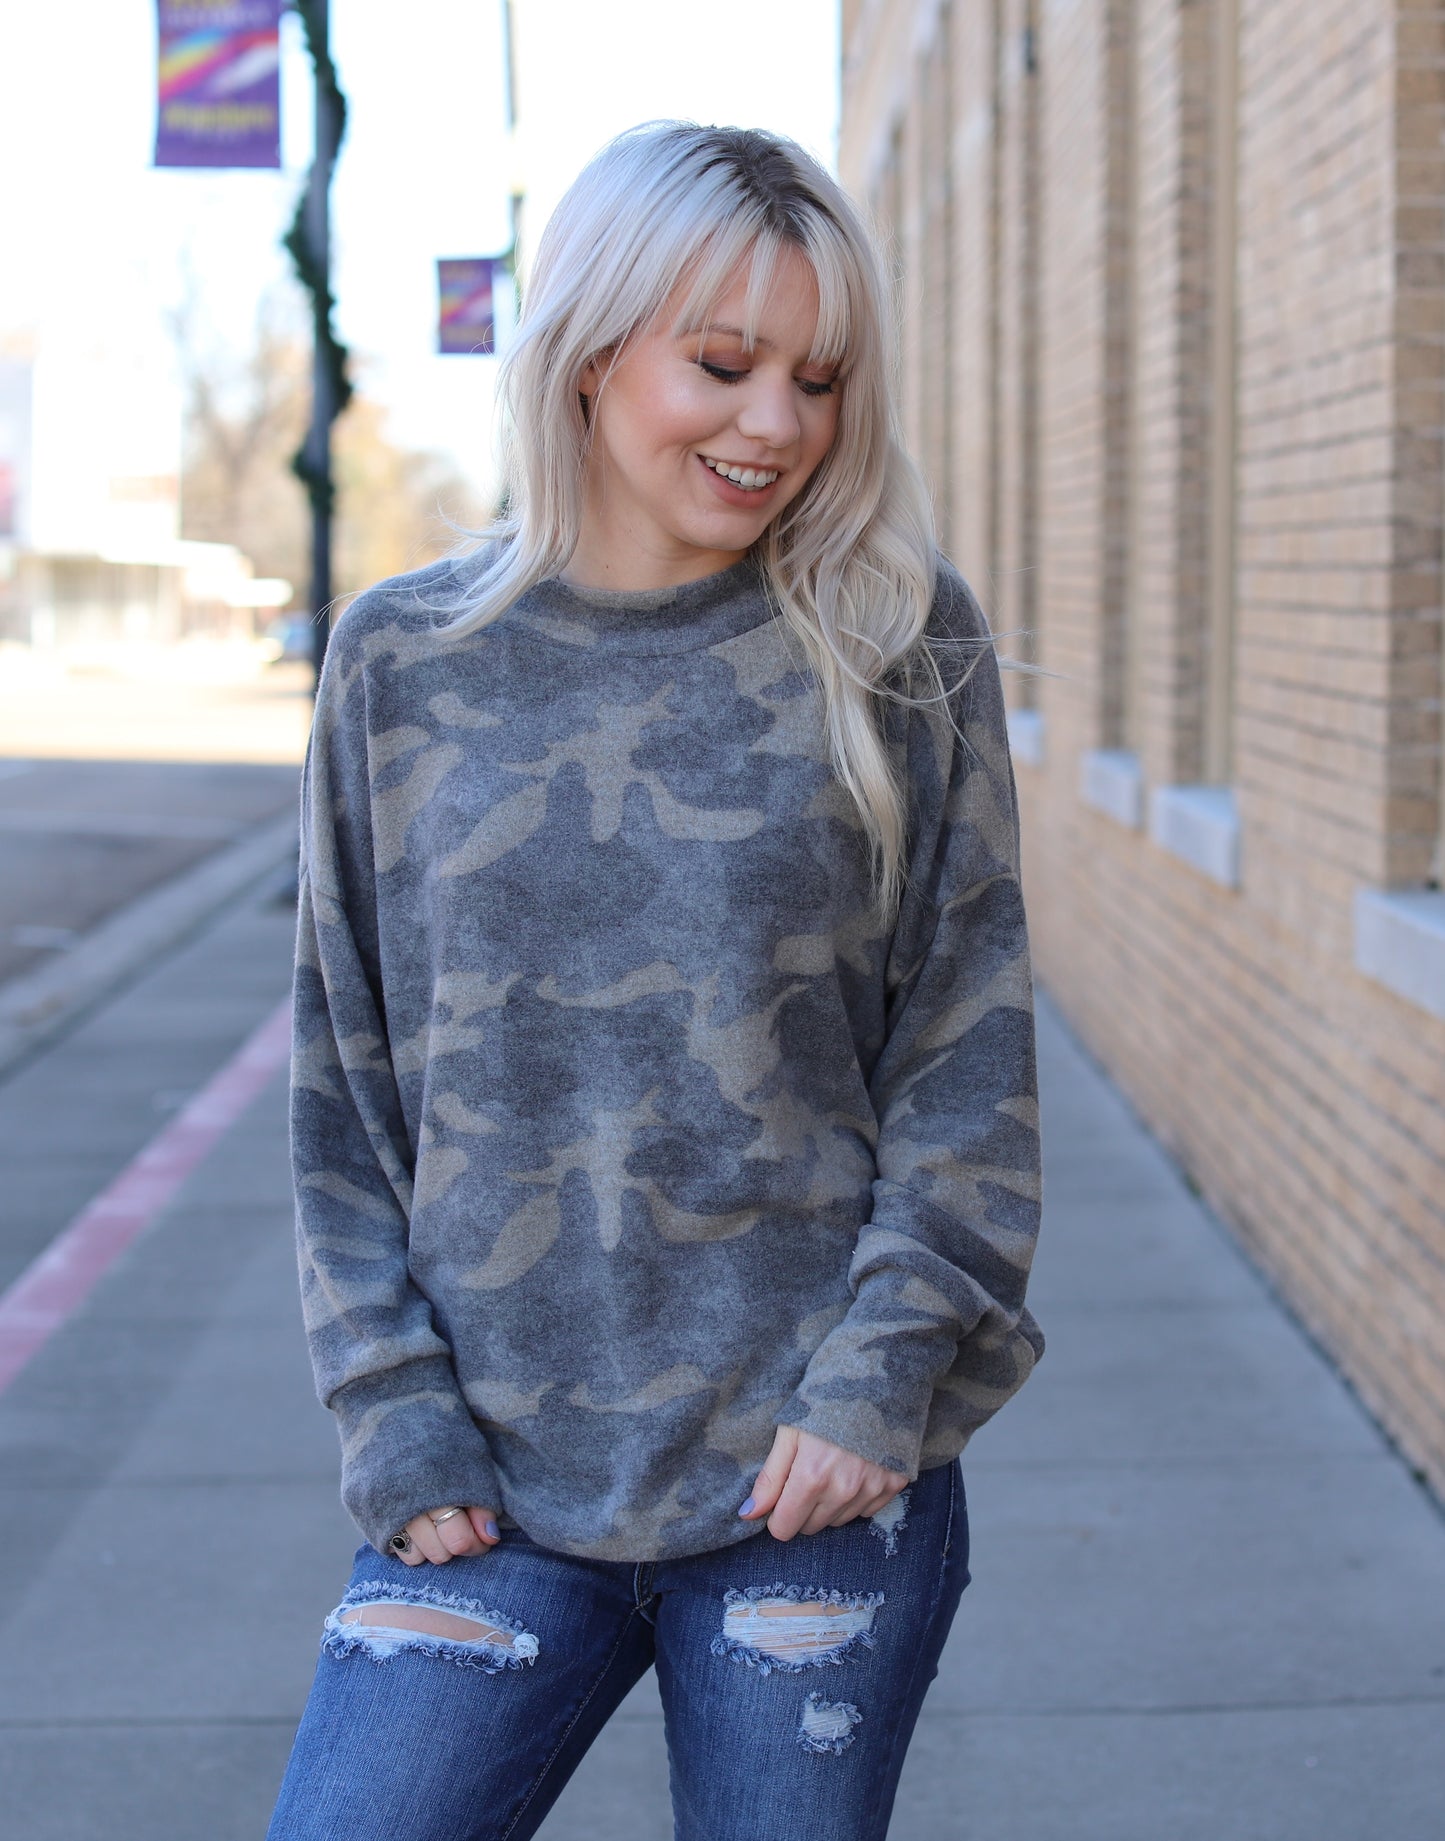 Brushed Knit Camo Top